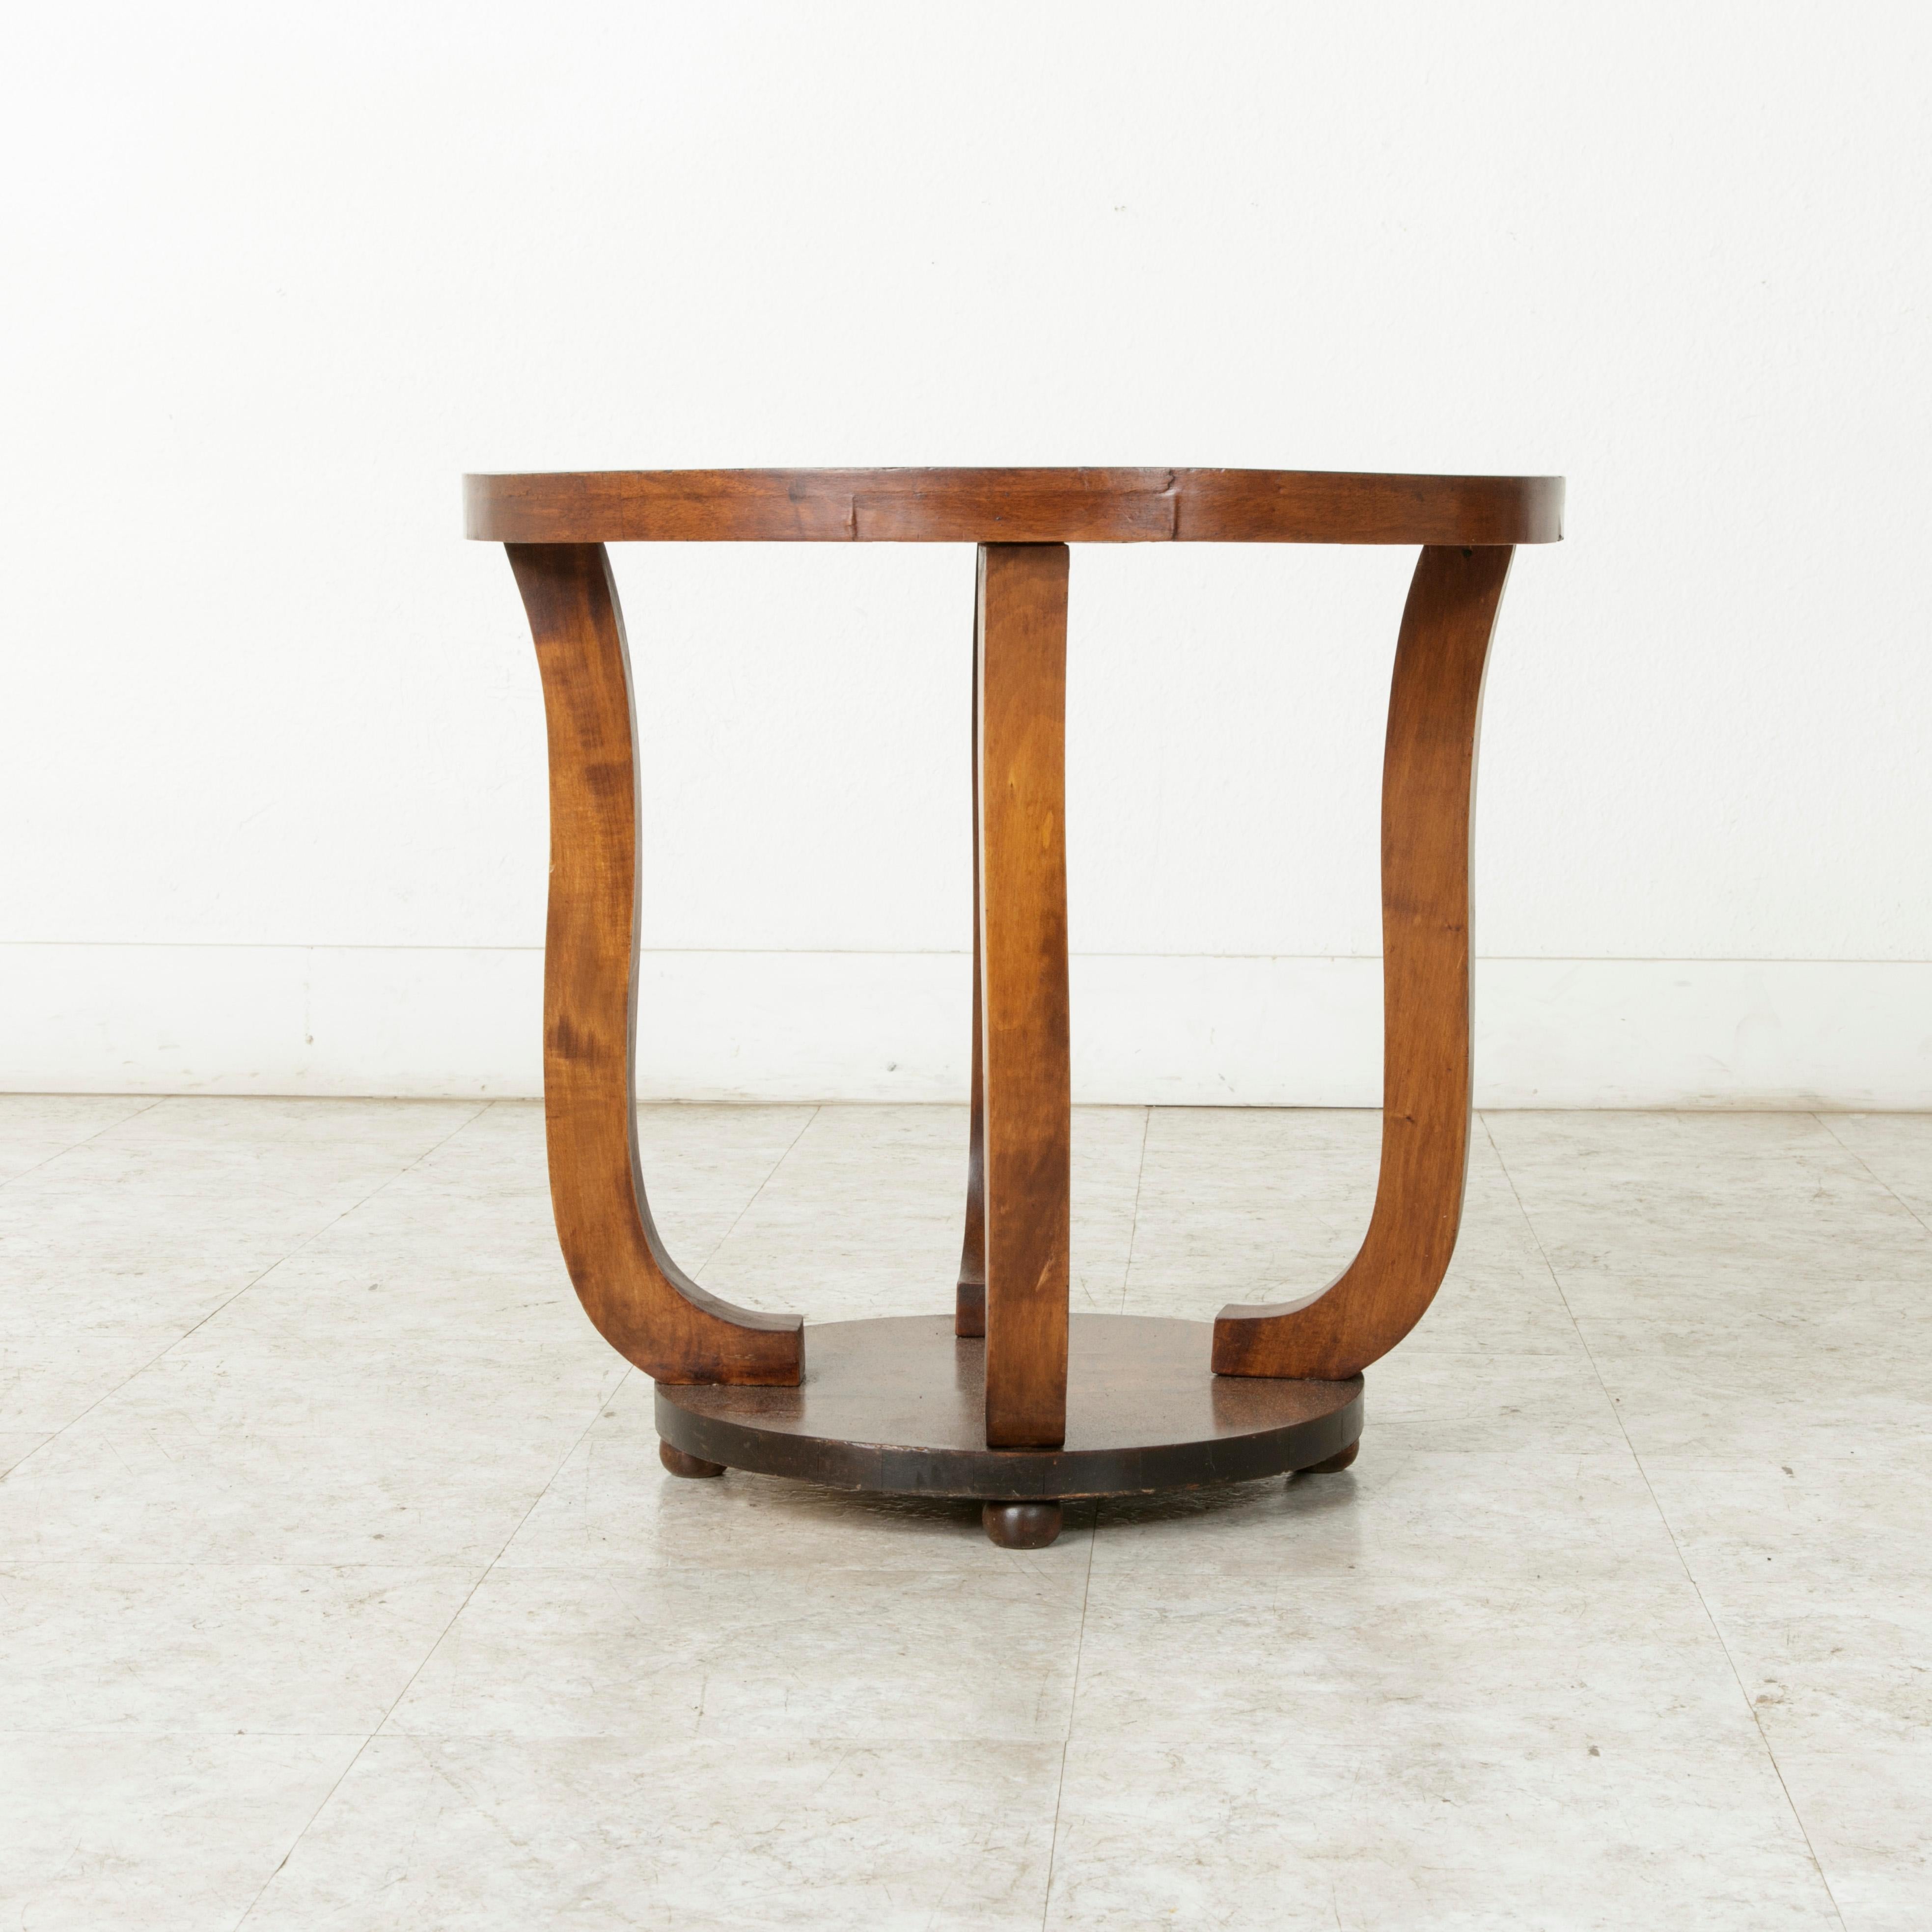 Early 20th Century French Art Deco Period Burl Walnut Guéridon or Side Table 2